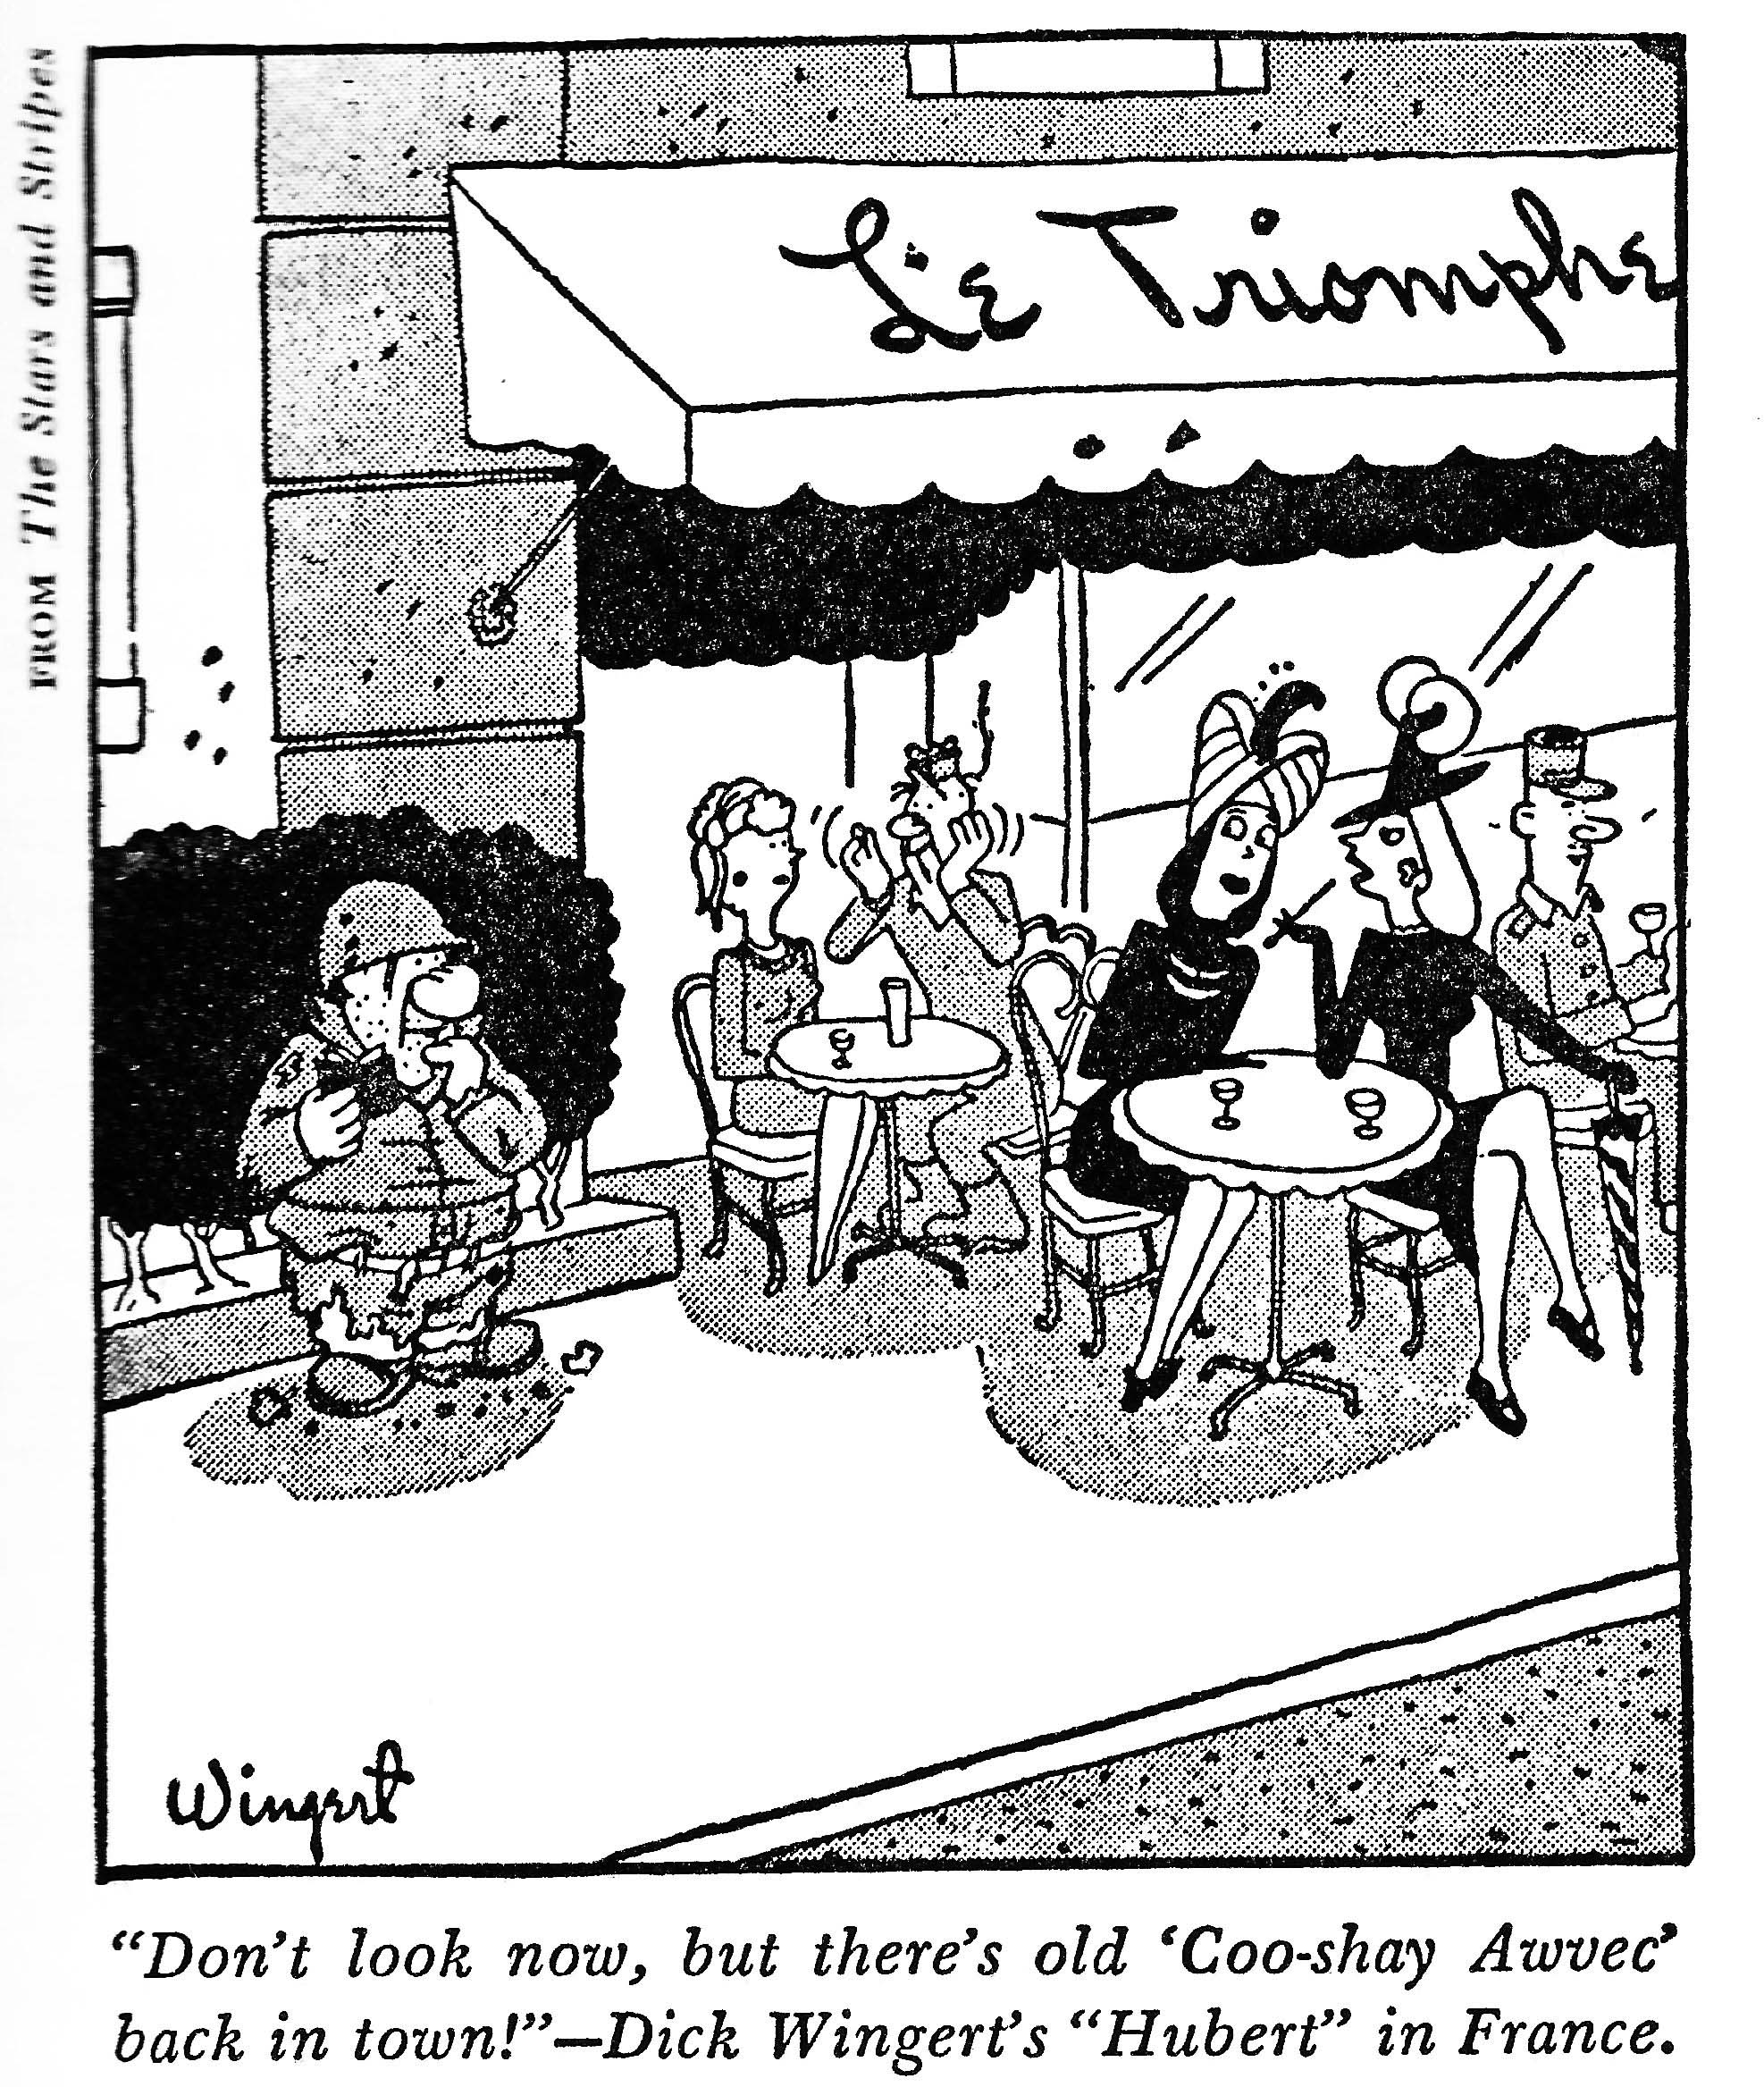 A cartoon from "Stars and Stripes" depicts a bedraggled American G.I. standing expectantly outside a Parisian cafe with two women privately joking about his pronunciation of "Sleep with."